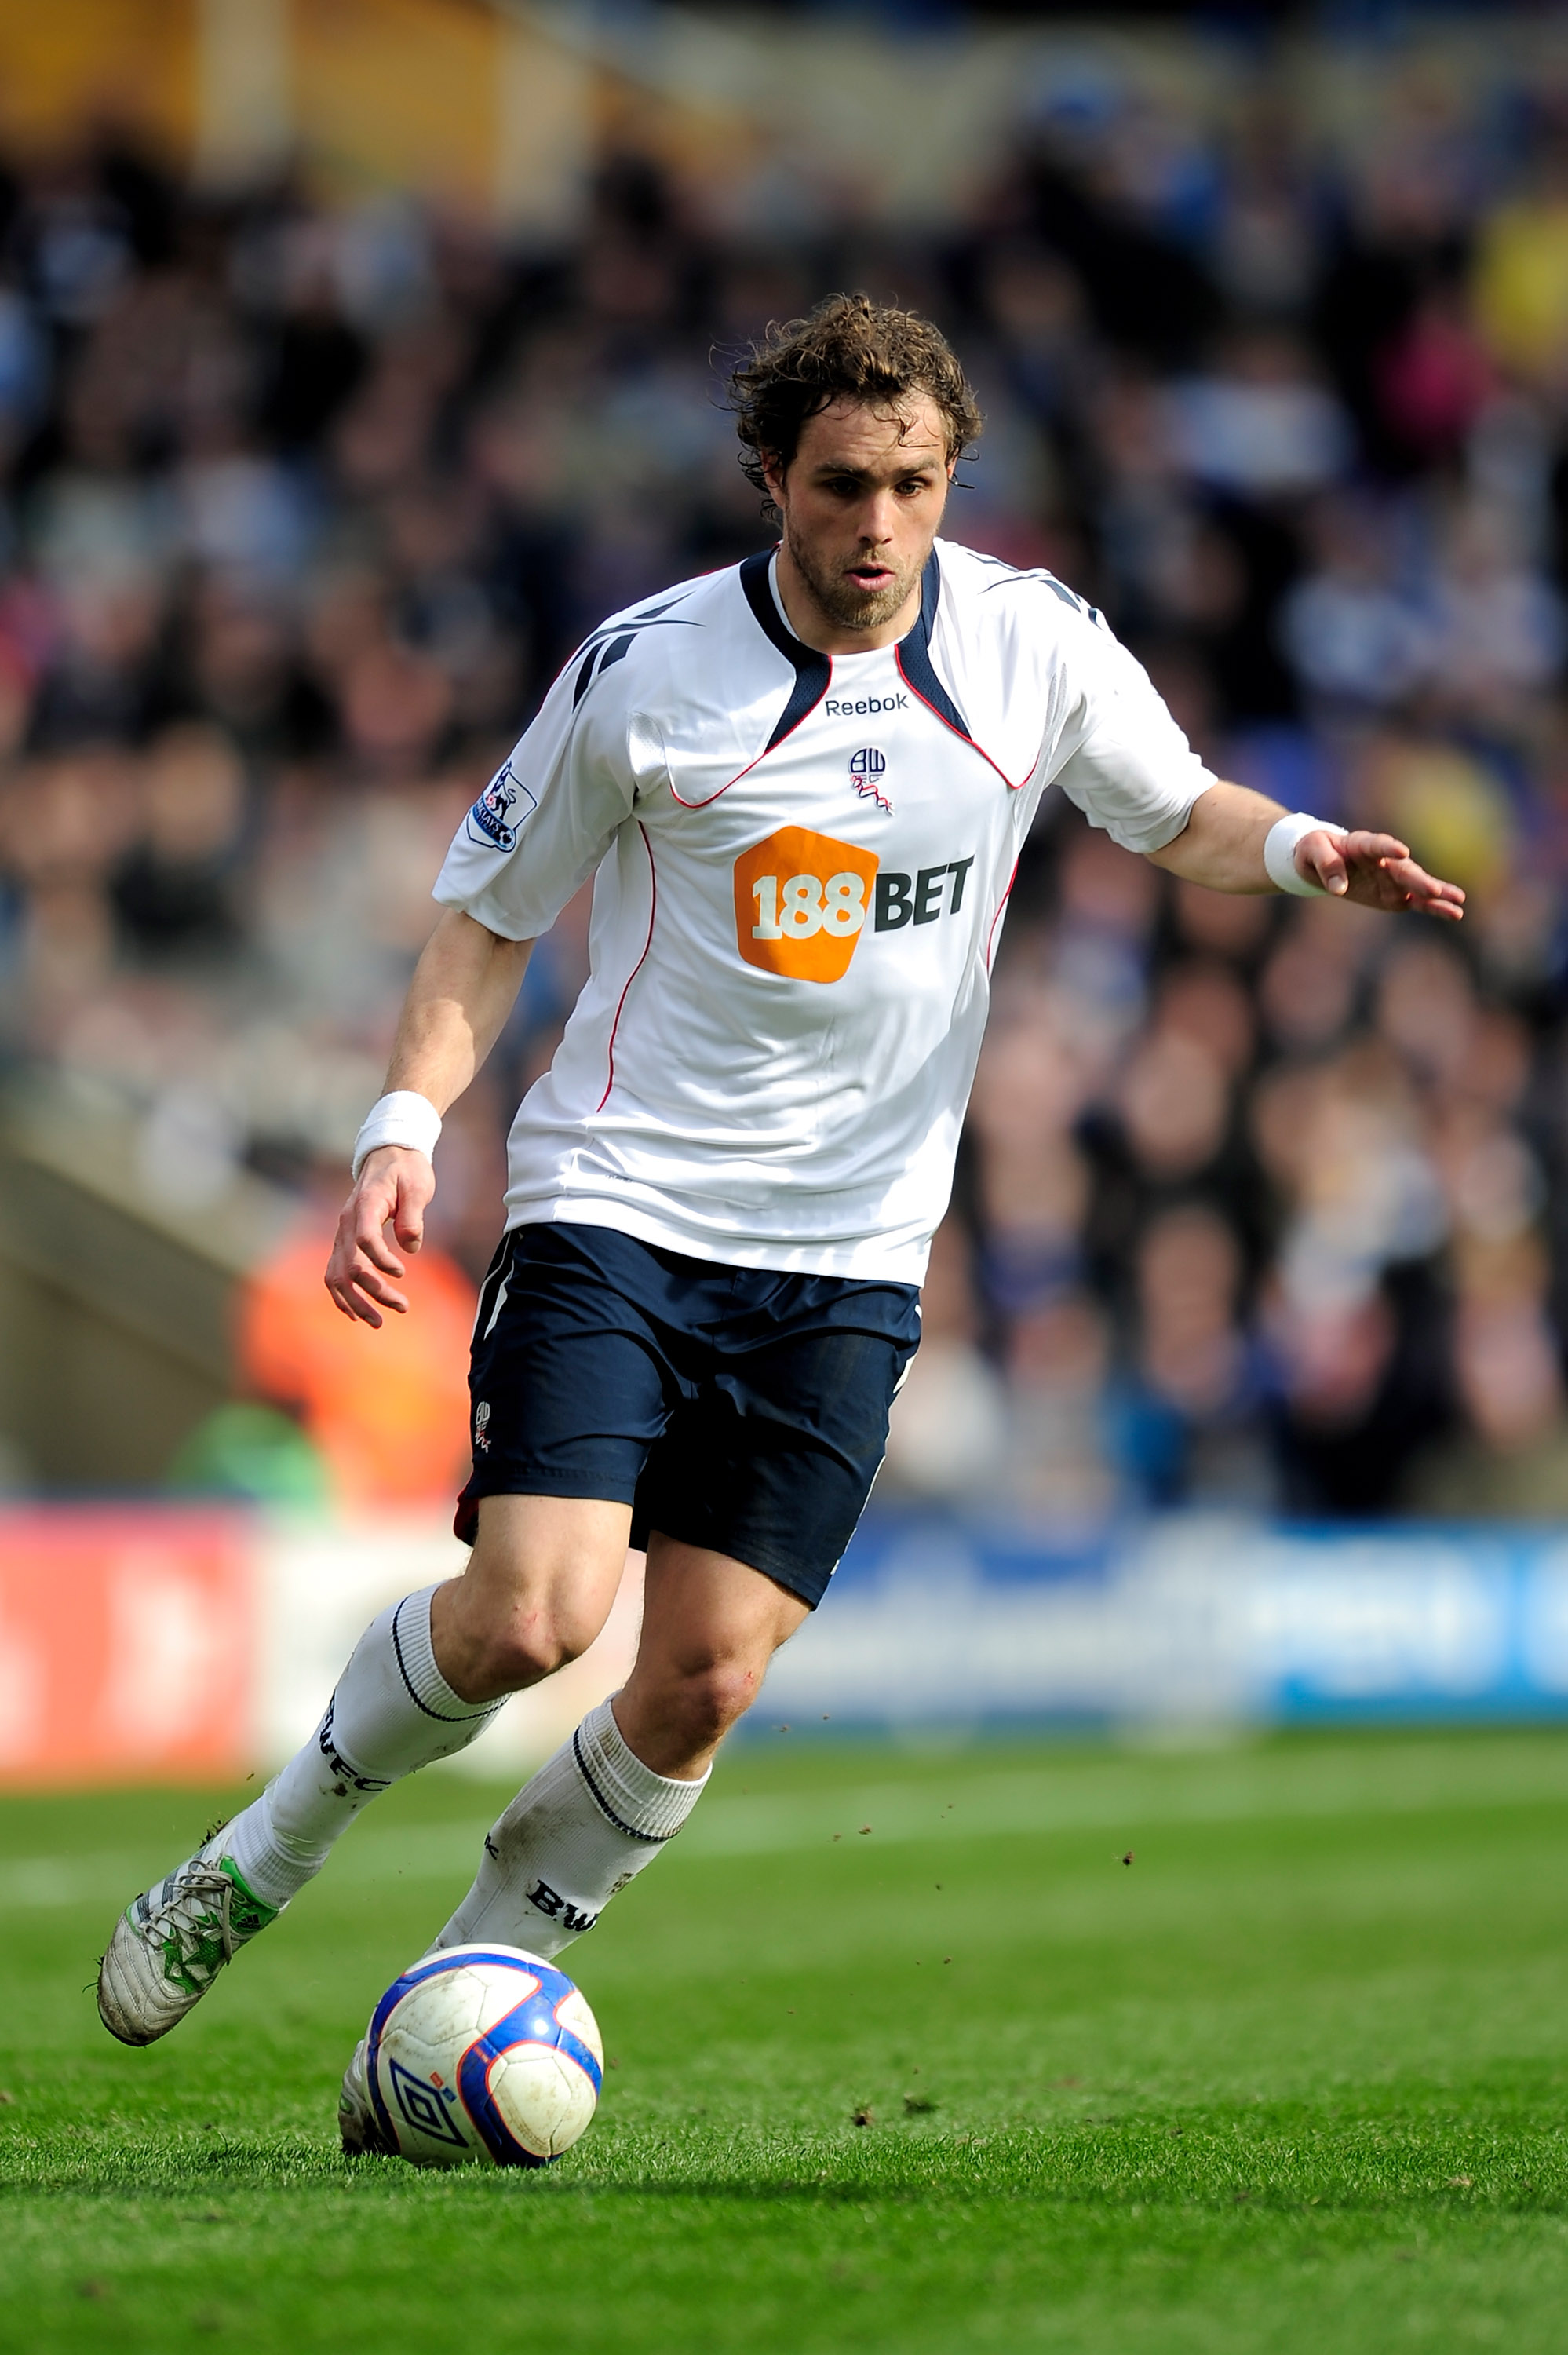 BIRMINGHAM, ENGLAND - MARCH 12: Johan Elmander of Bolton Wanderers on the ball during the FA Cup sponsored by E.On Sixth Round match between Birmingham City and Bolton Wanderers at St Andrews on March 12, 2011 in Birmingham, England.  (Photo by Jamie McDo